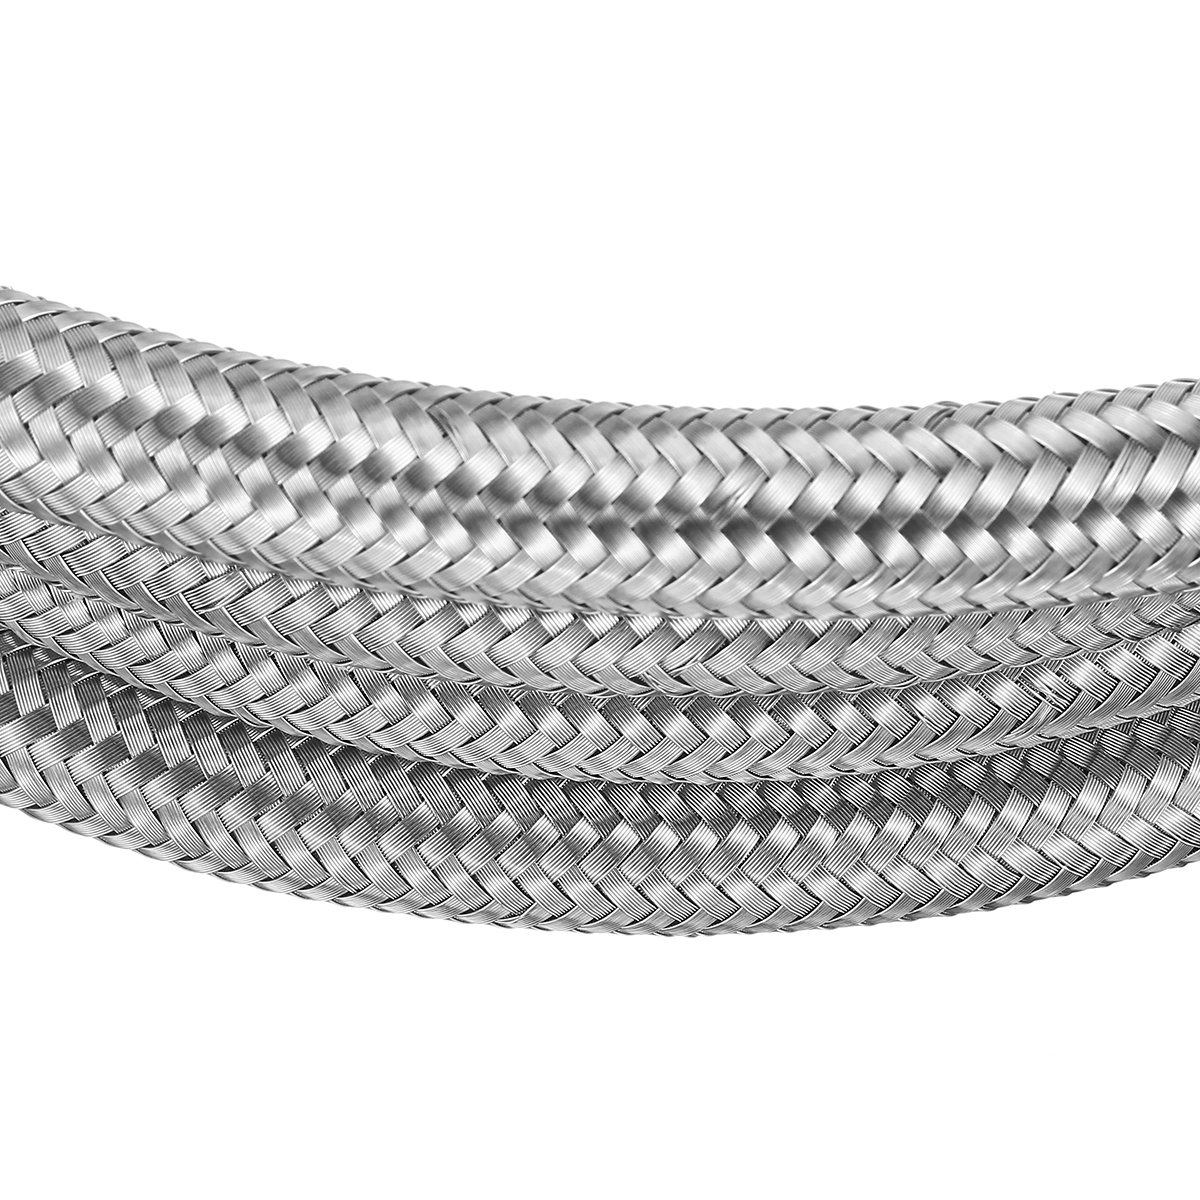 8FT-AN4-AN6-AN8-AN10-Fuel-Hose-Oil-Gas-Line-Pipe-Stainless-Steel-Braided-Silver-1685158-6